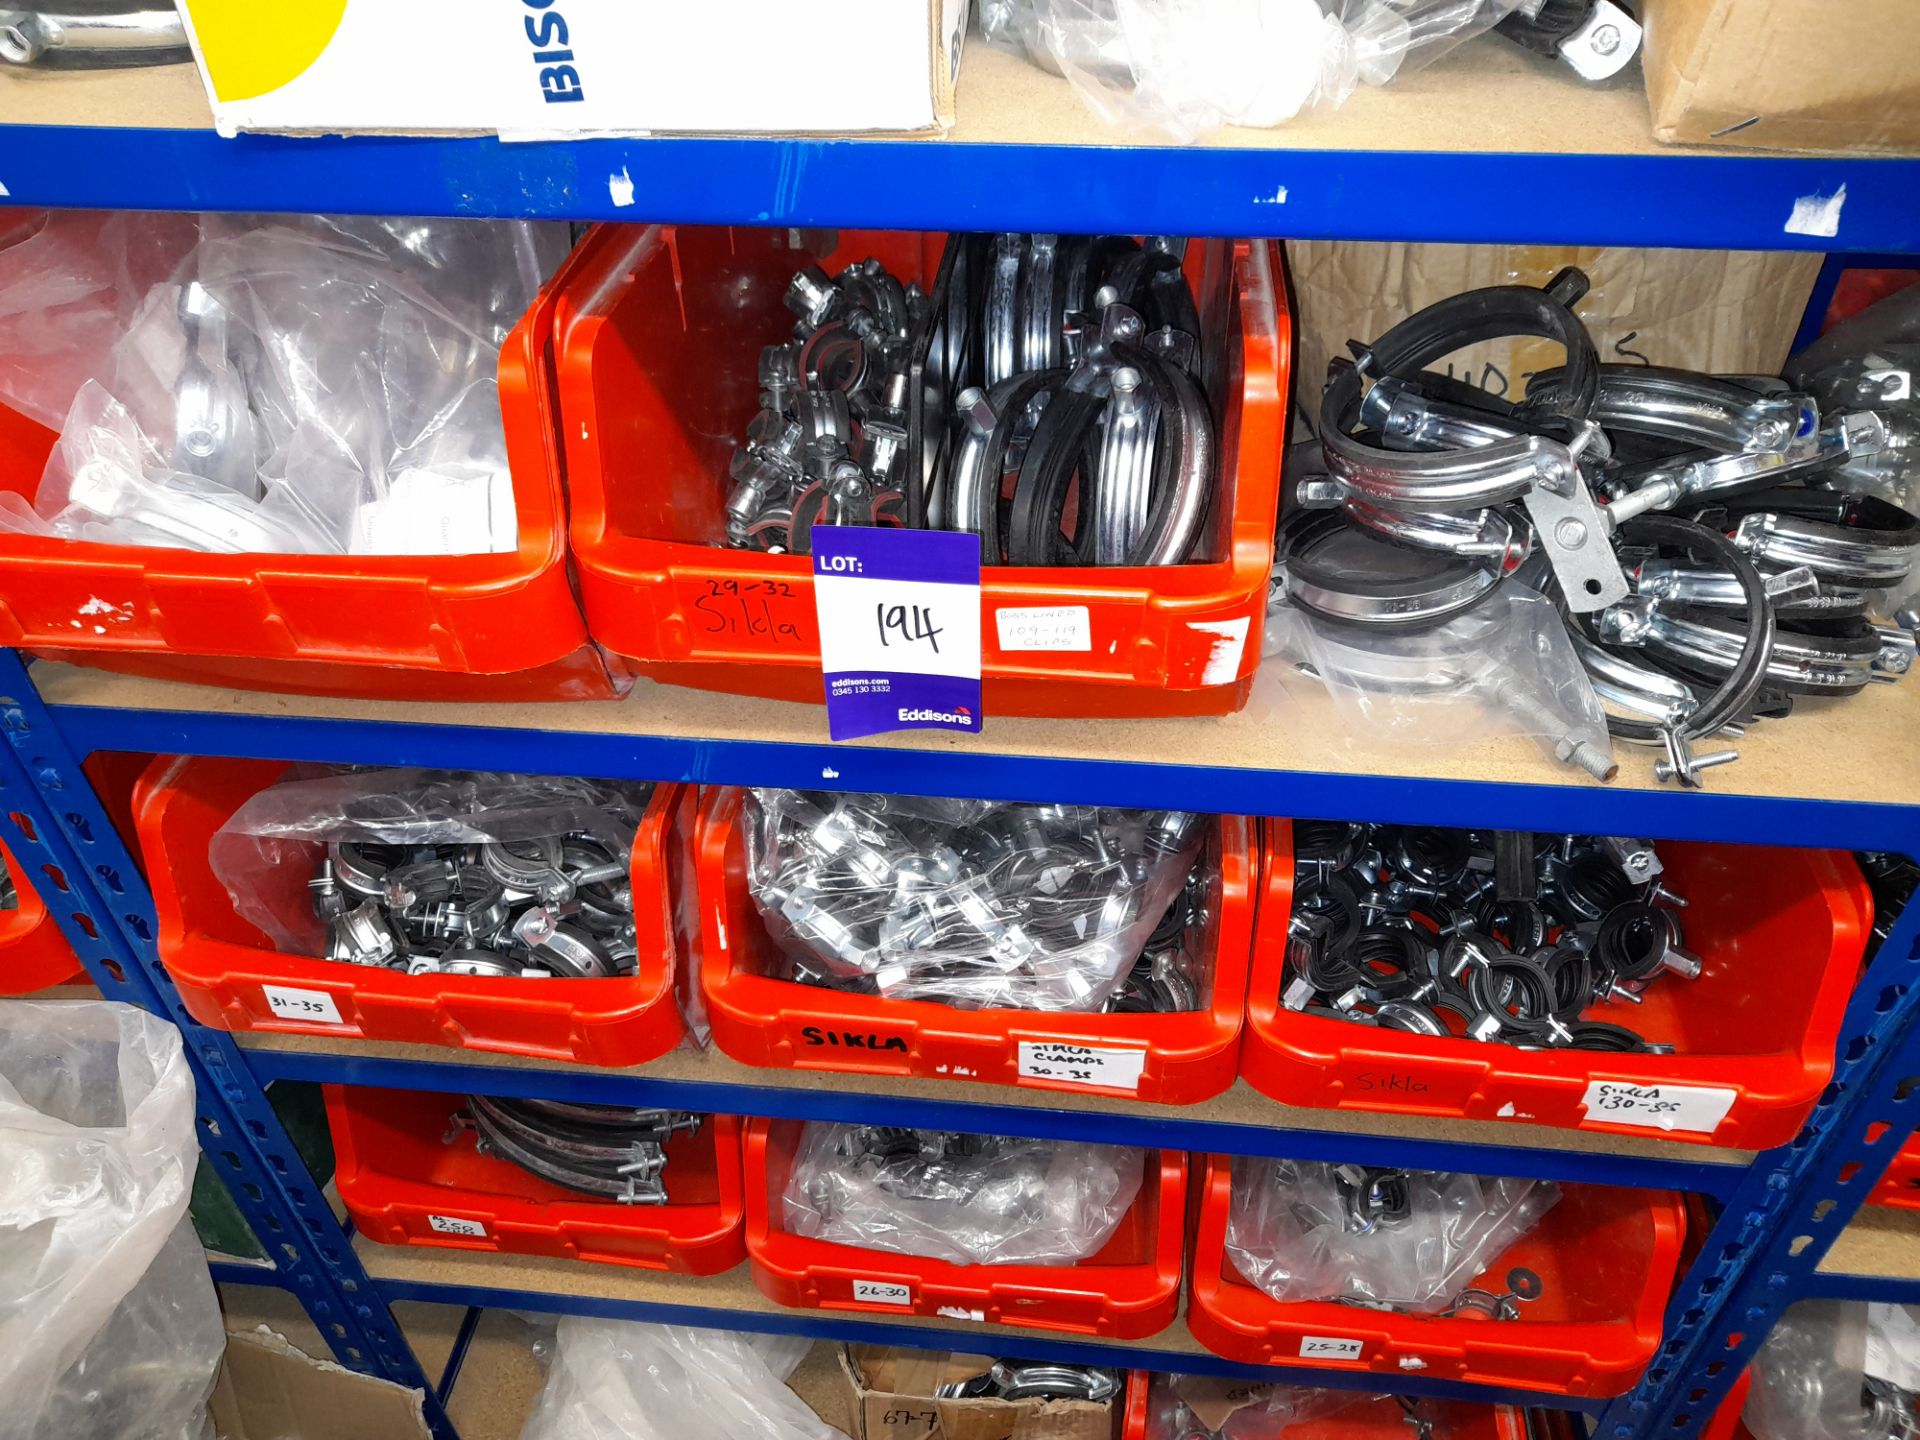 Large Quantity of stock to 13 bays, bolts, nuts, clamps, bracketry, fittings, washers, plastic - Image 18 of 41